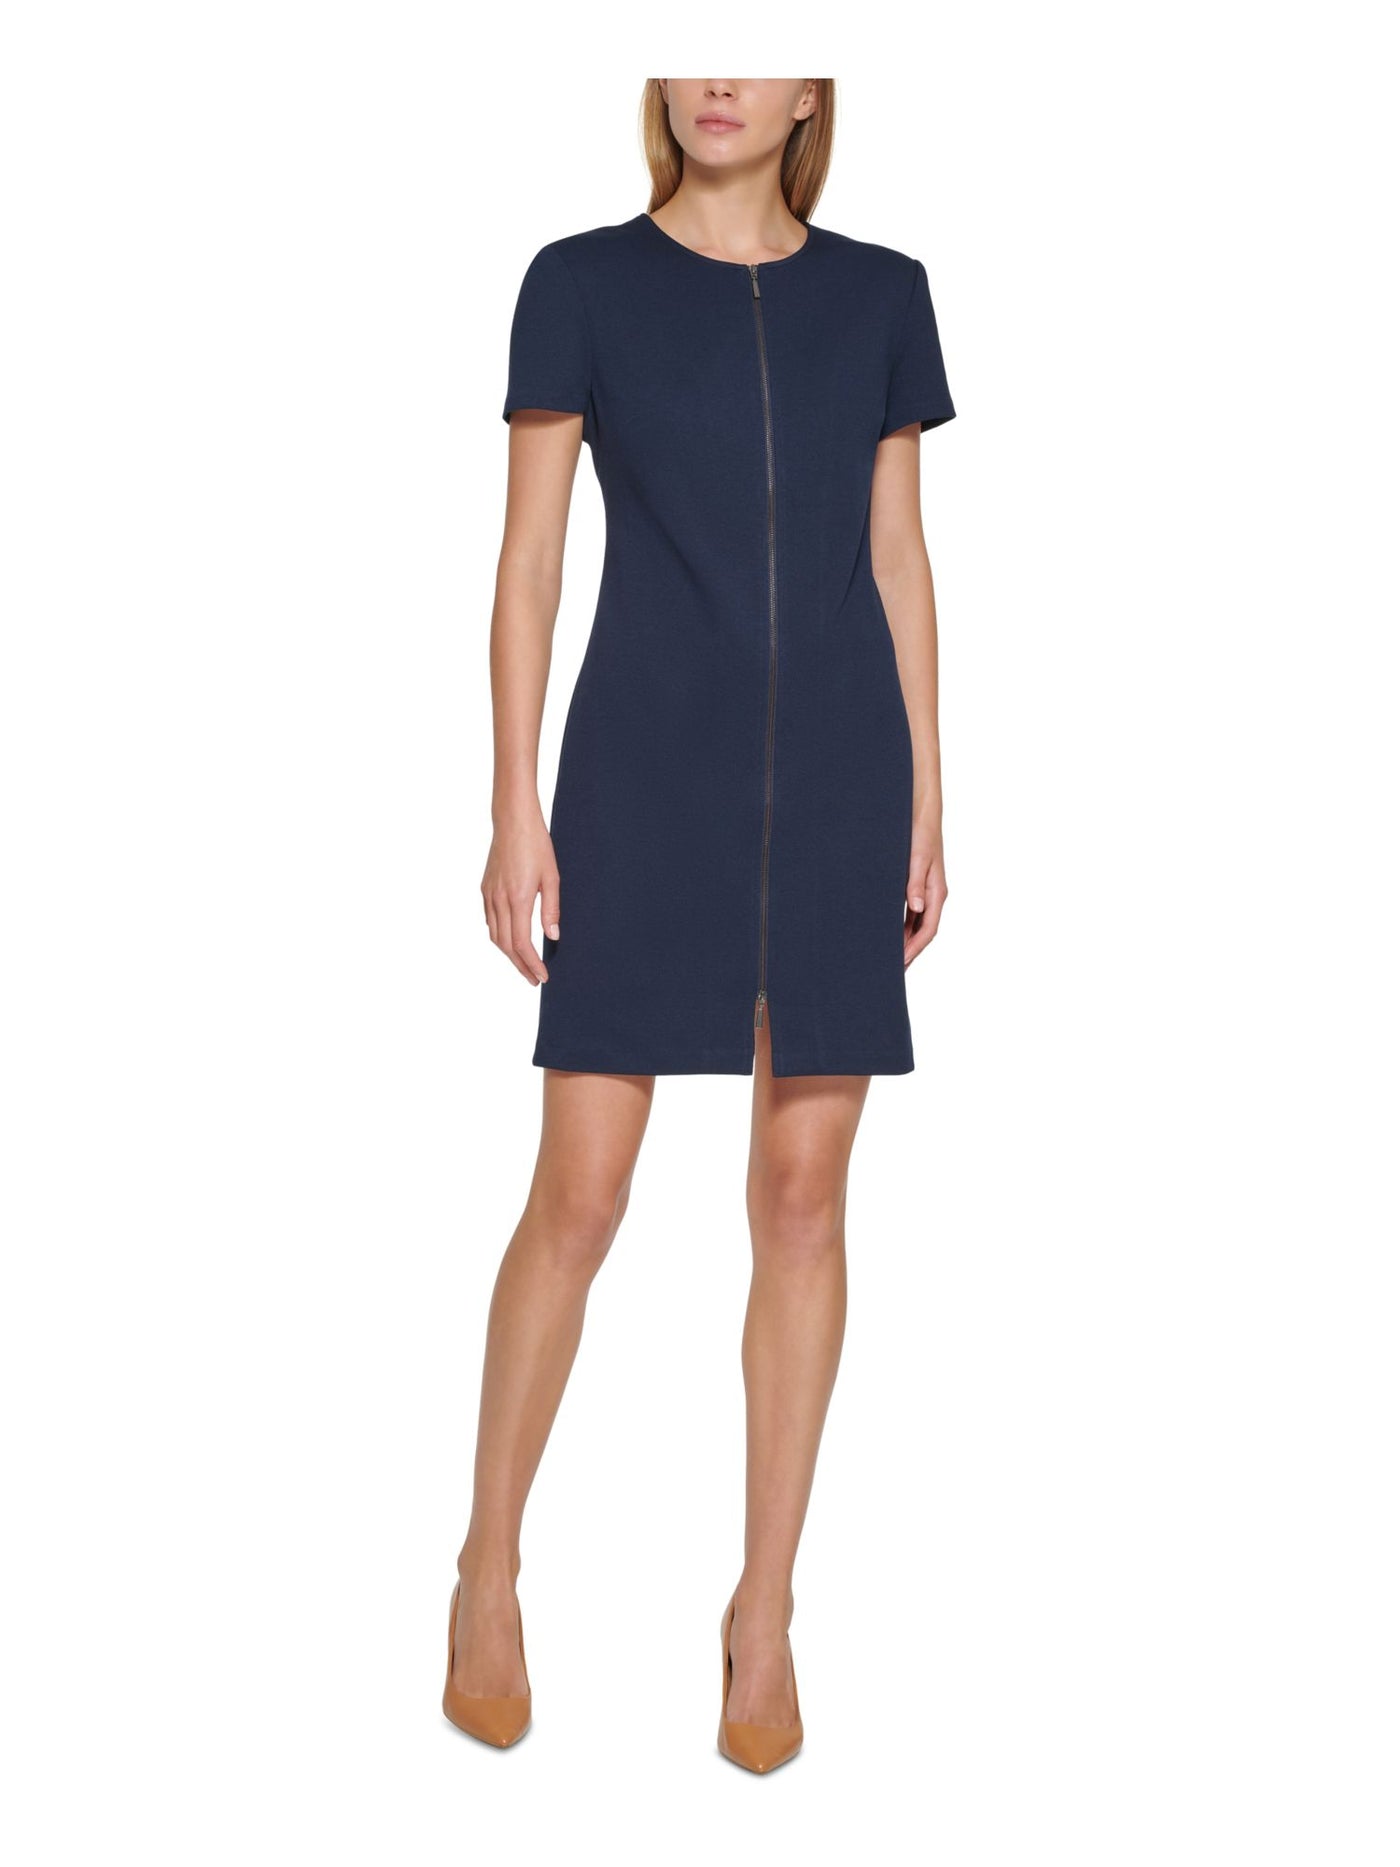 CALVIN KLEIN Womens Navy Stretch Zippered Shoulder Pads Short Sleeve Jewel Neck Above The Knee Party Sheath Dress 14